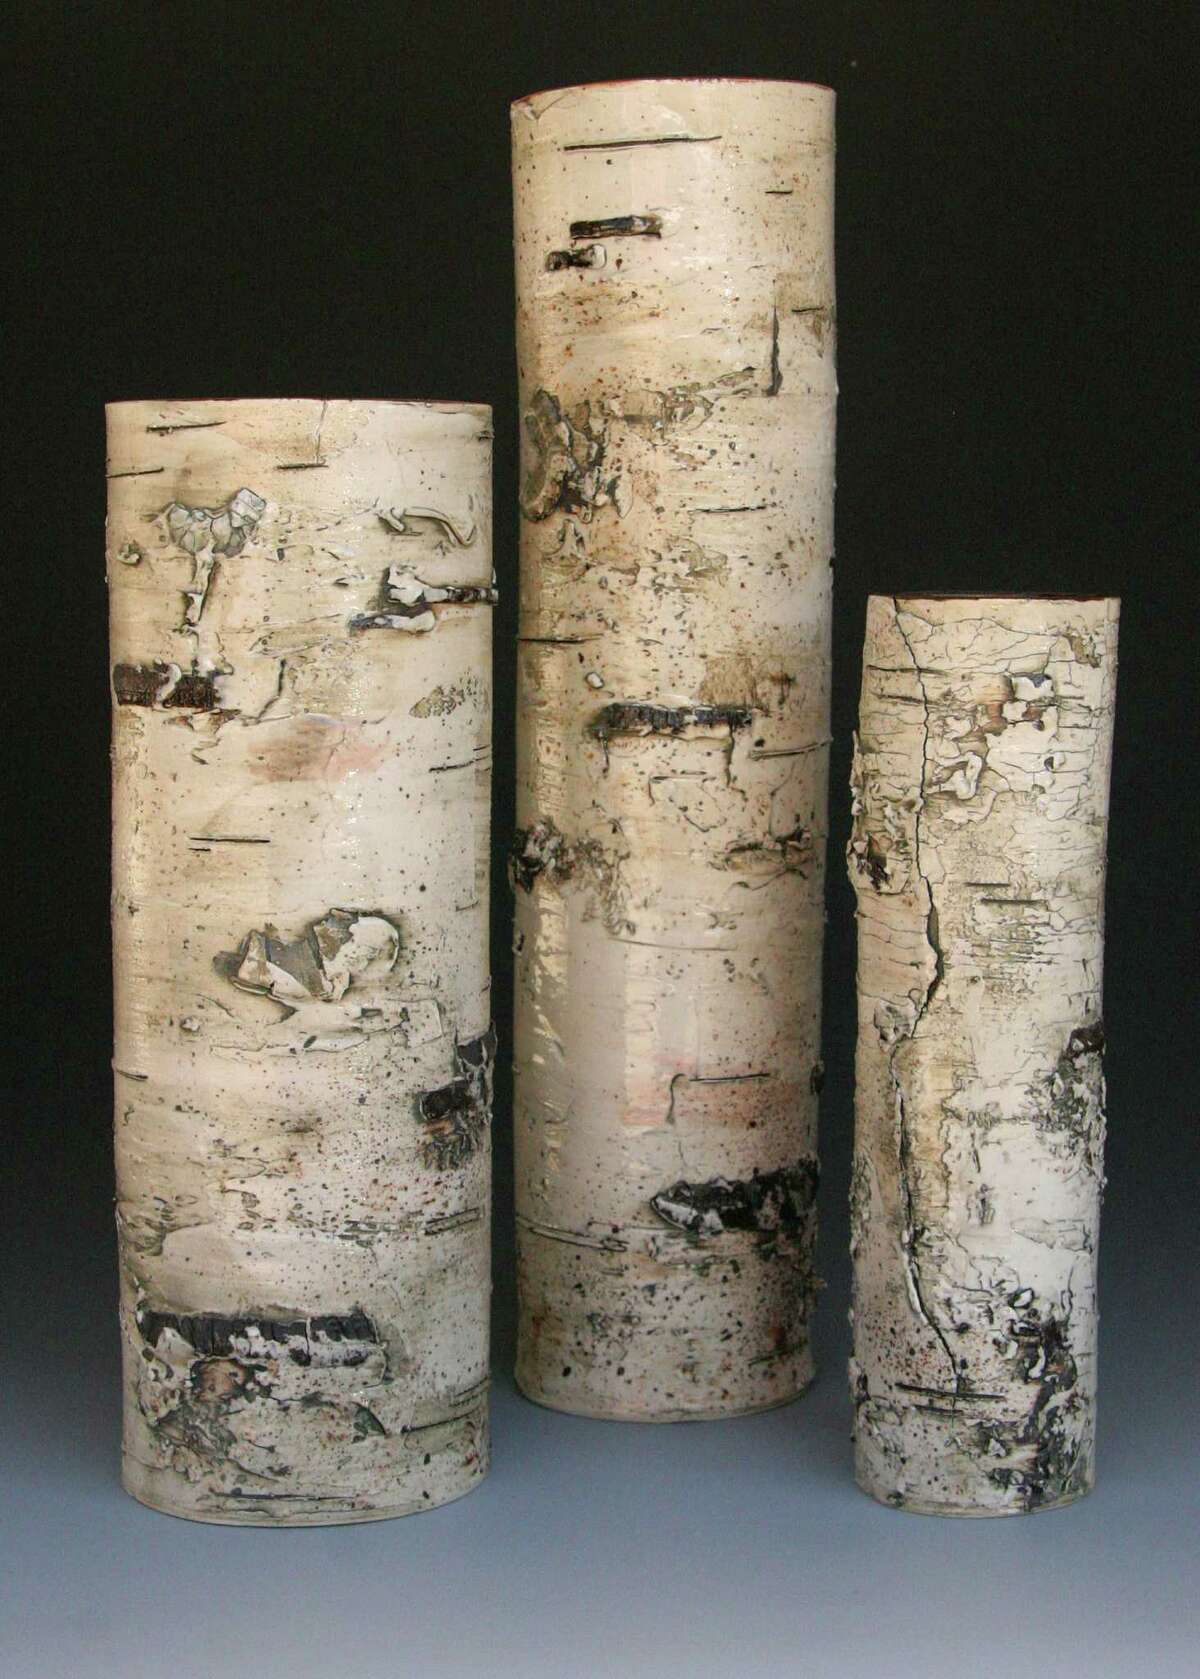 Michigan artist Elizabeth Delyria's stoneware vases look so much like actual birch logs that viewers might have to see the smooth, hollow interior to believe they're not actually wood; $TK at Asher Gallery in the Houston Center for Contemporary Craft.